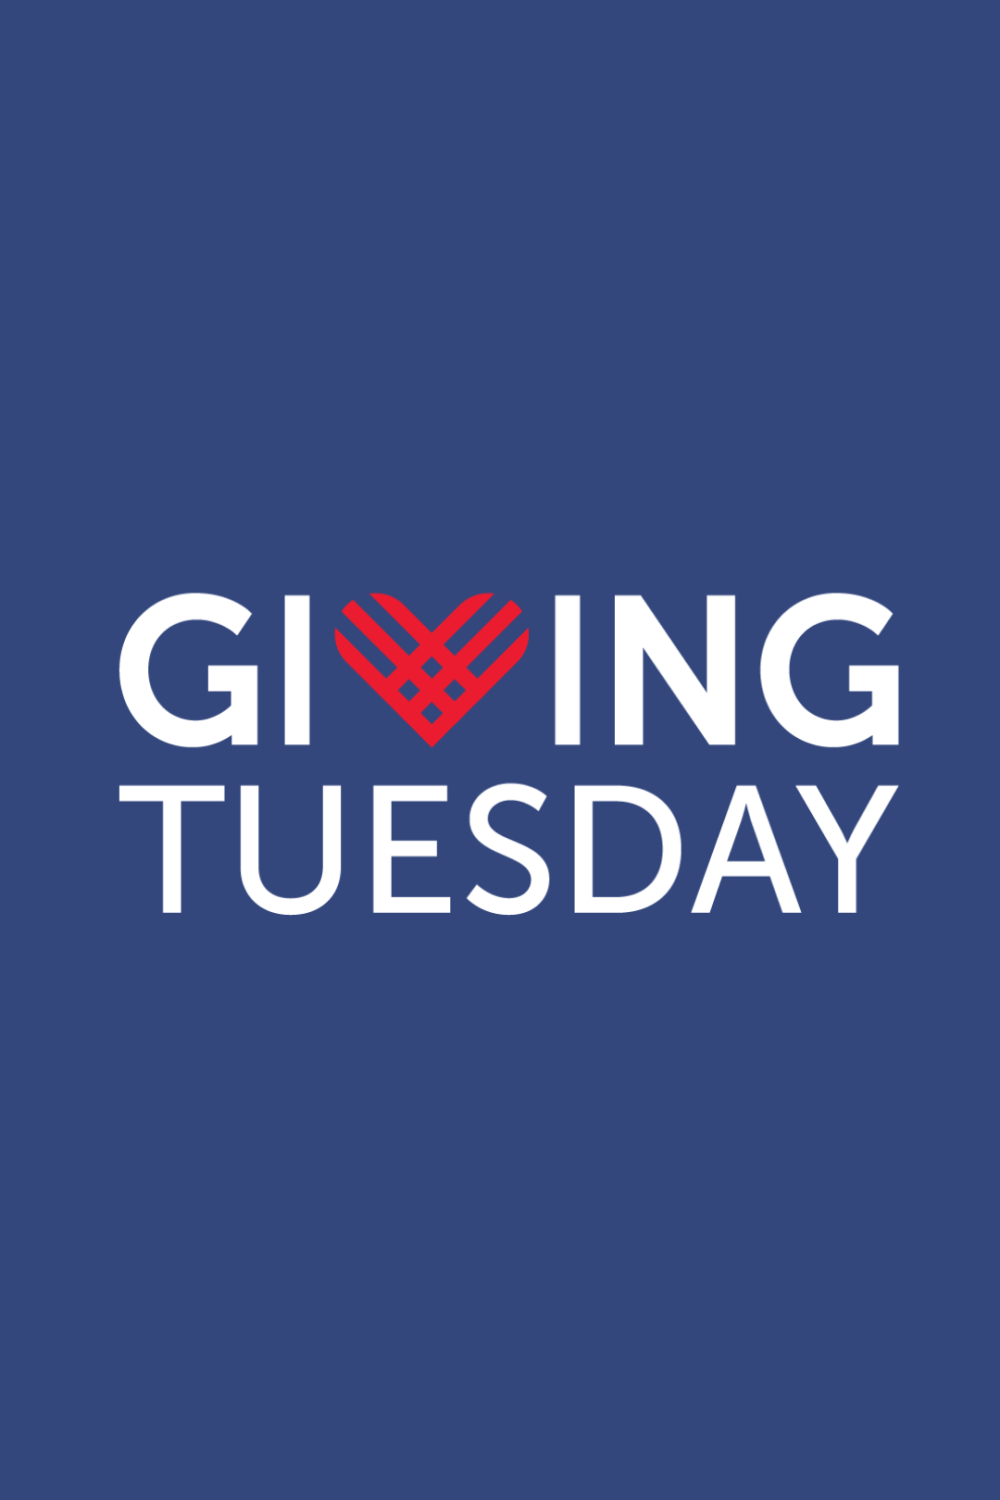 #GivingTuesday and I Support the Girls